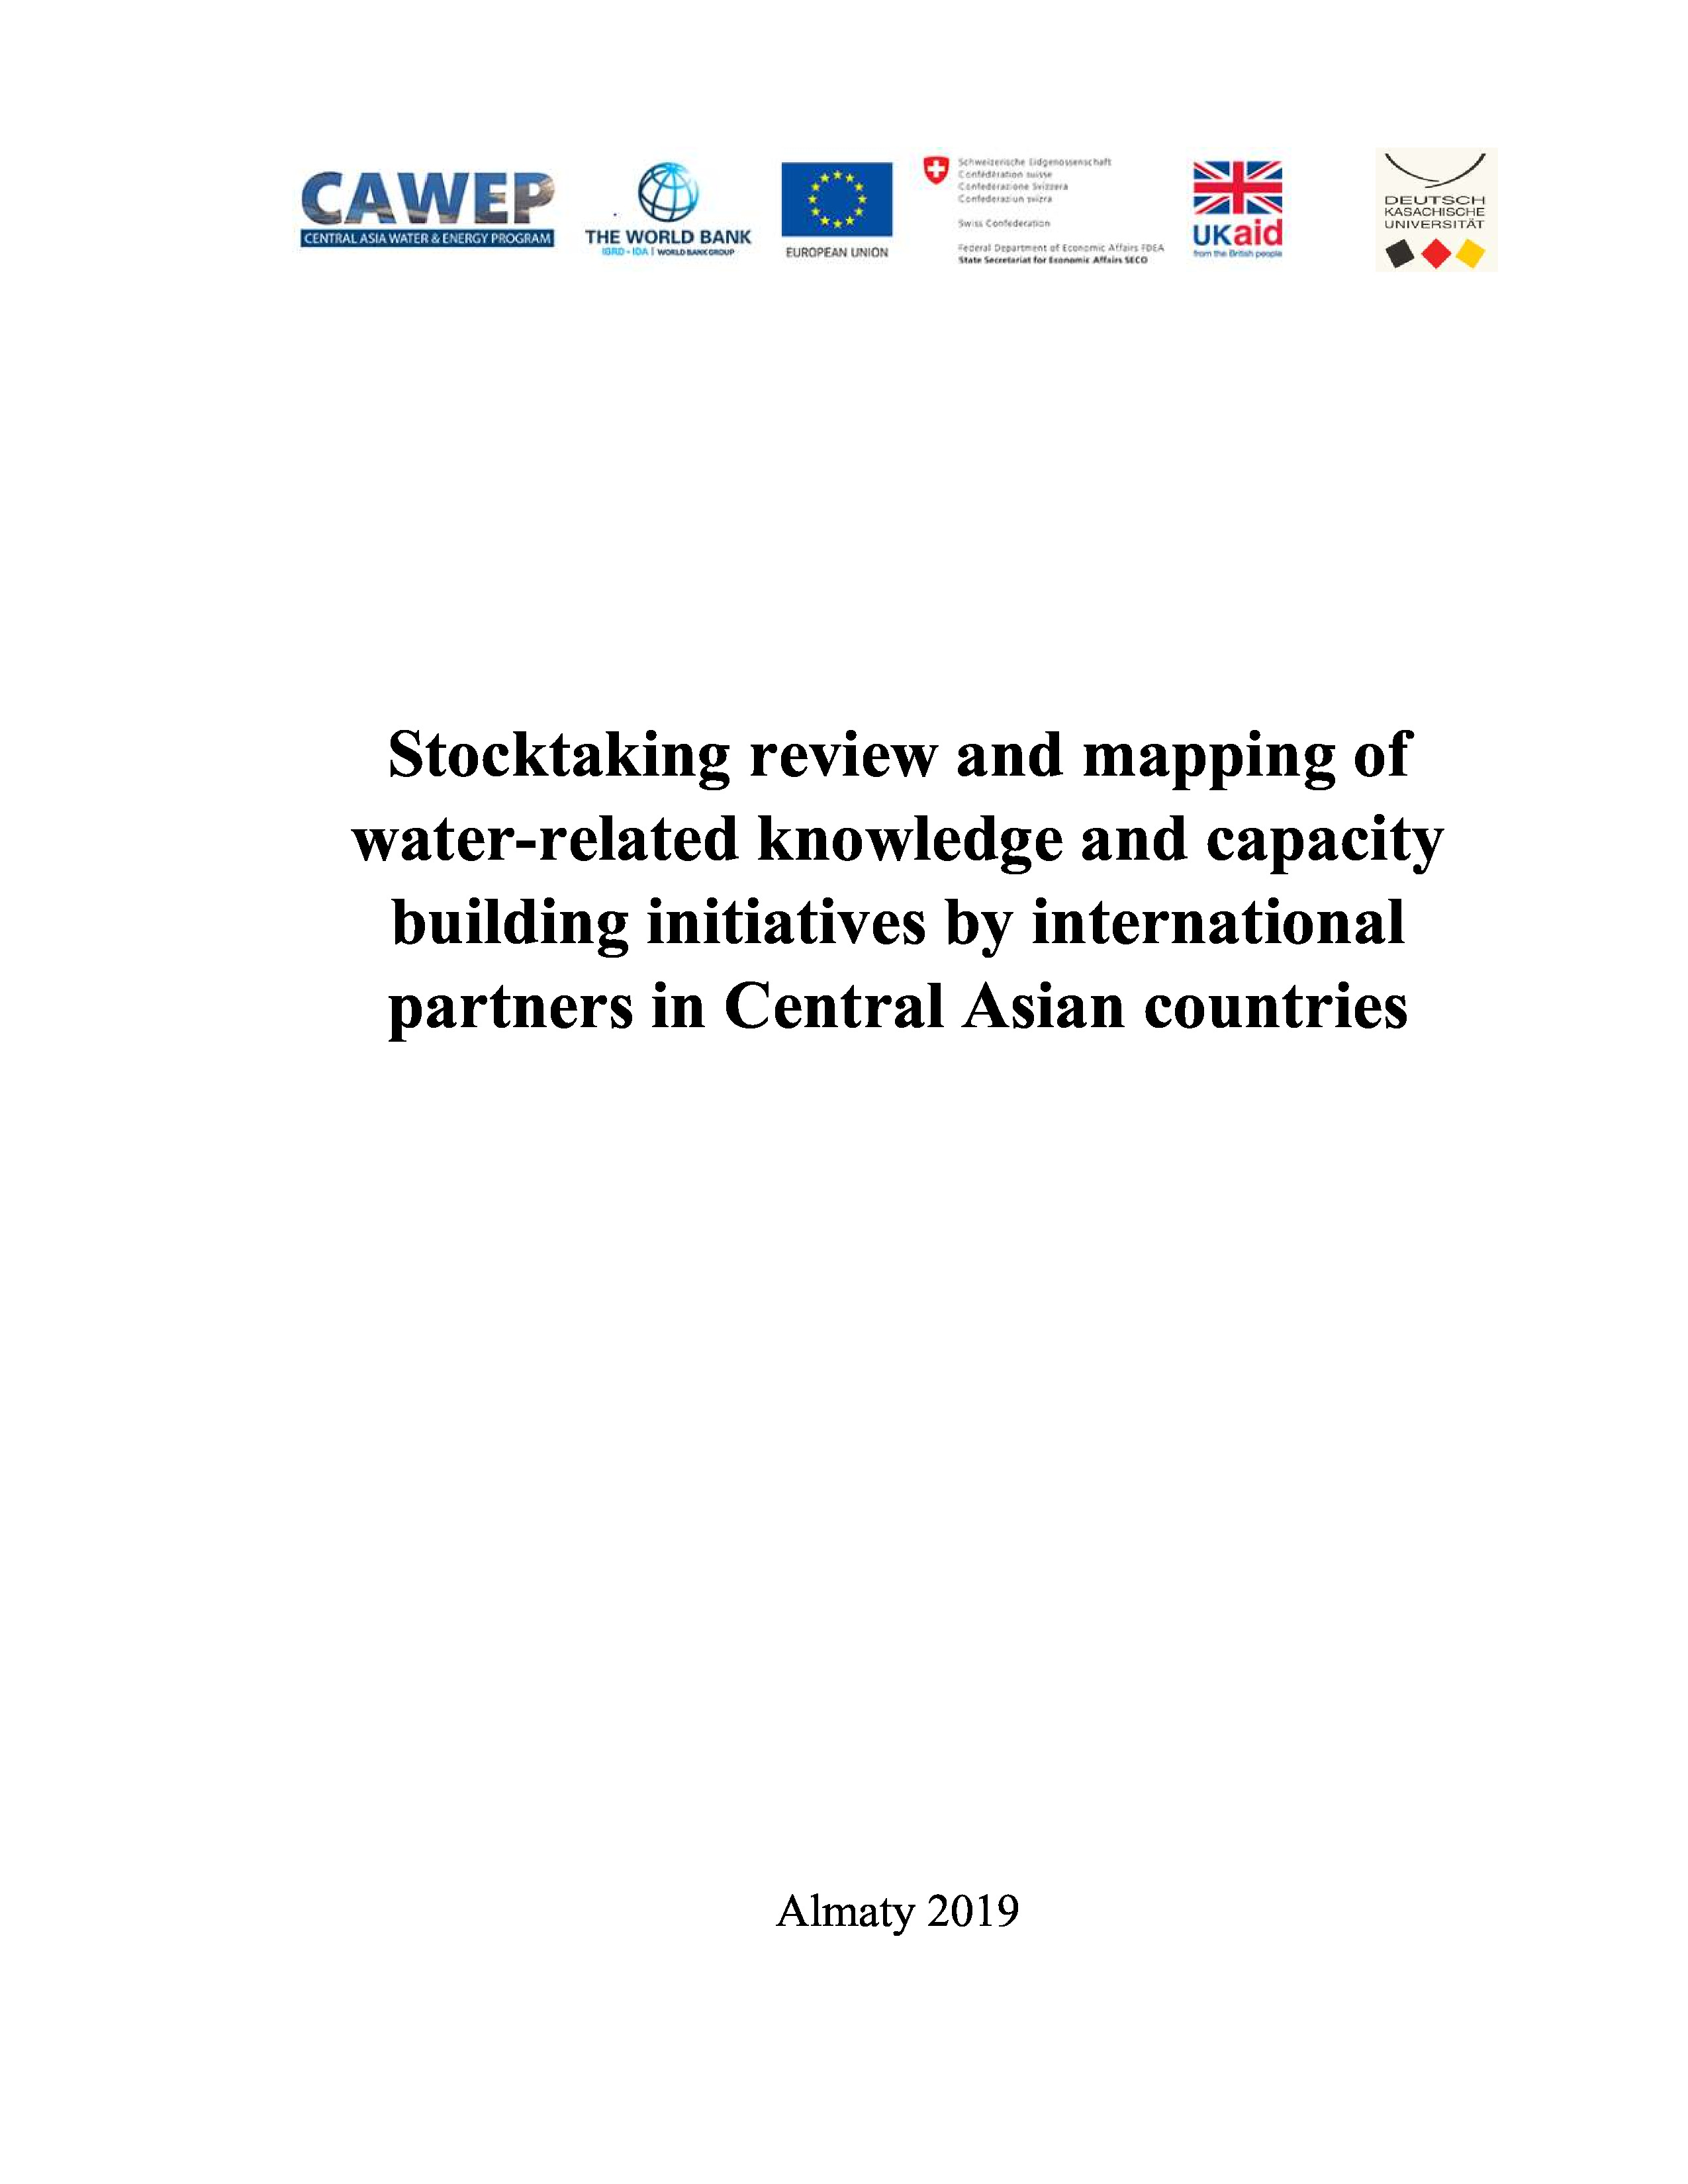 Stocktaking review and mapping of water-related knowledge and capacity building initiatives by international partners in Central Asian countries, 2019